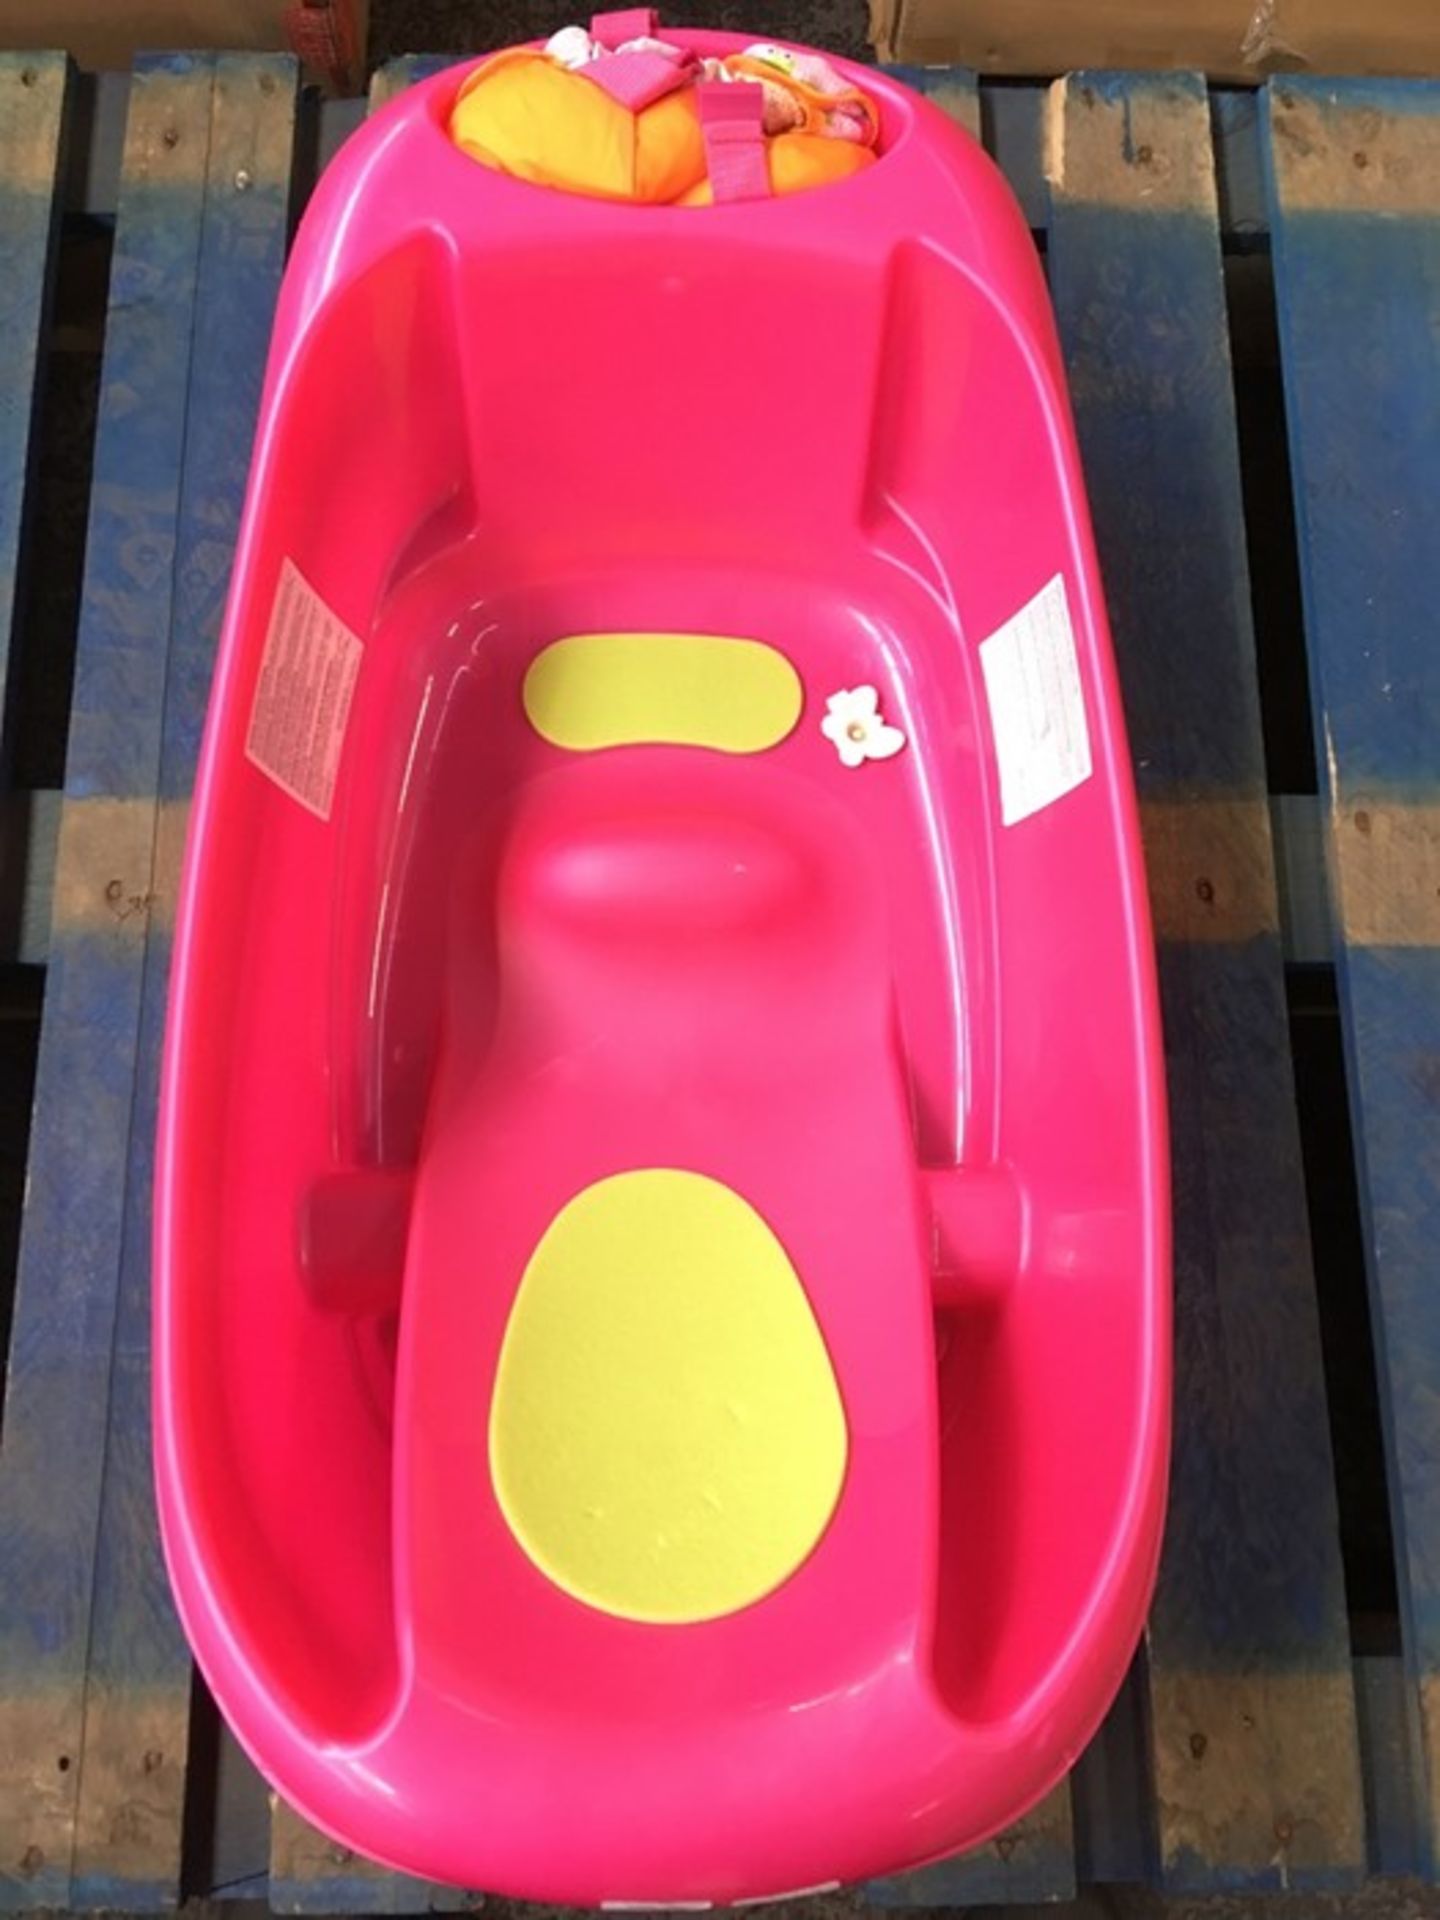 1 MOTHERCARE BABY BATH IN PINK / RRP £30.00 (PUBLIC VIEWING AVAILABLE)